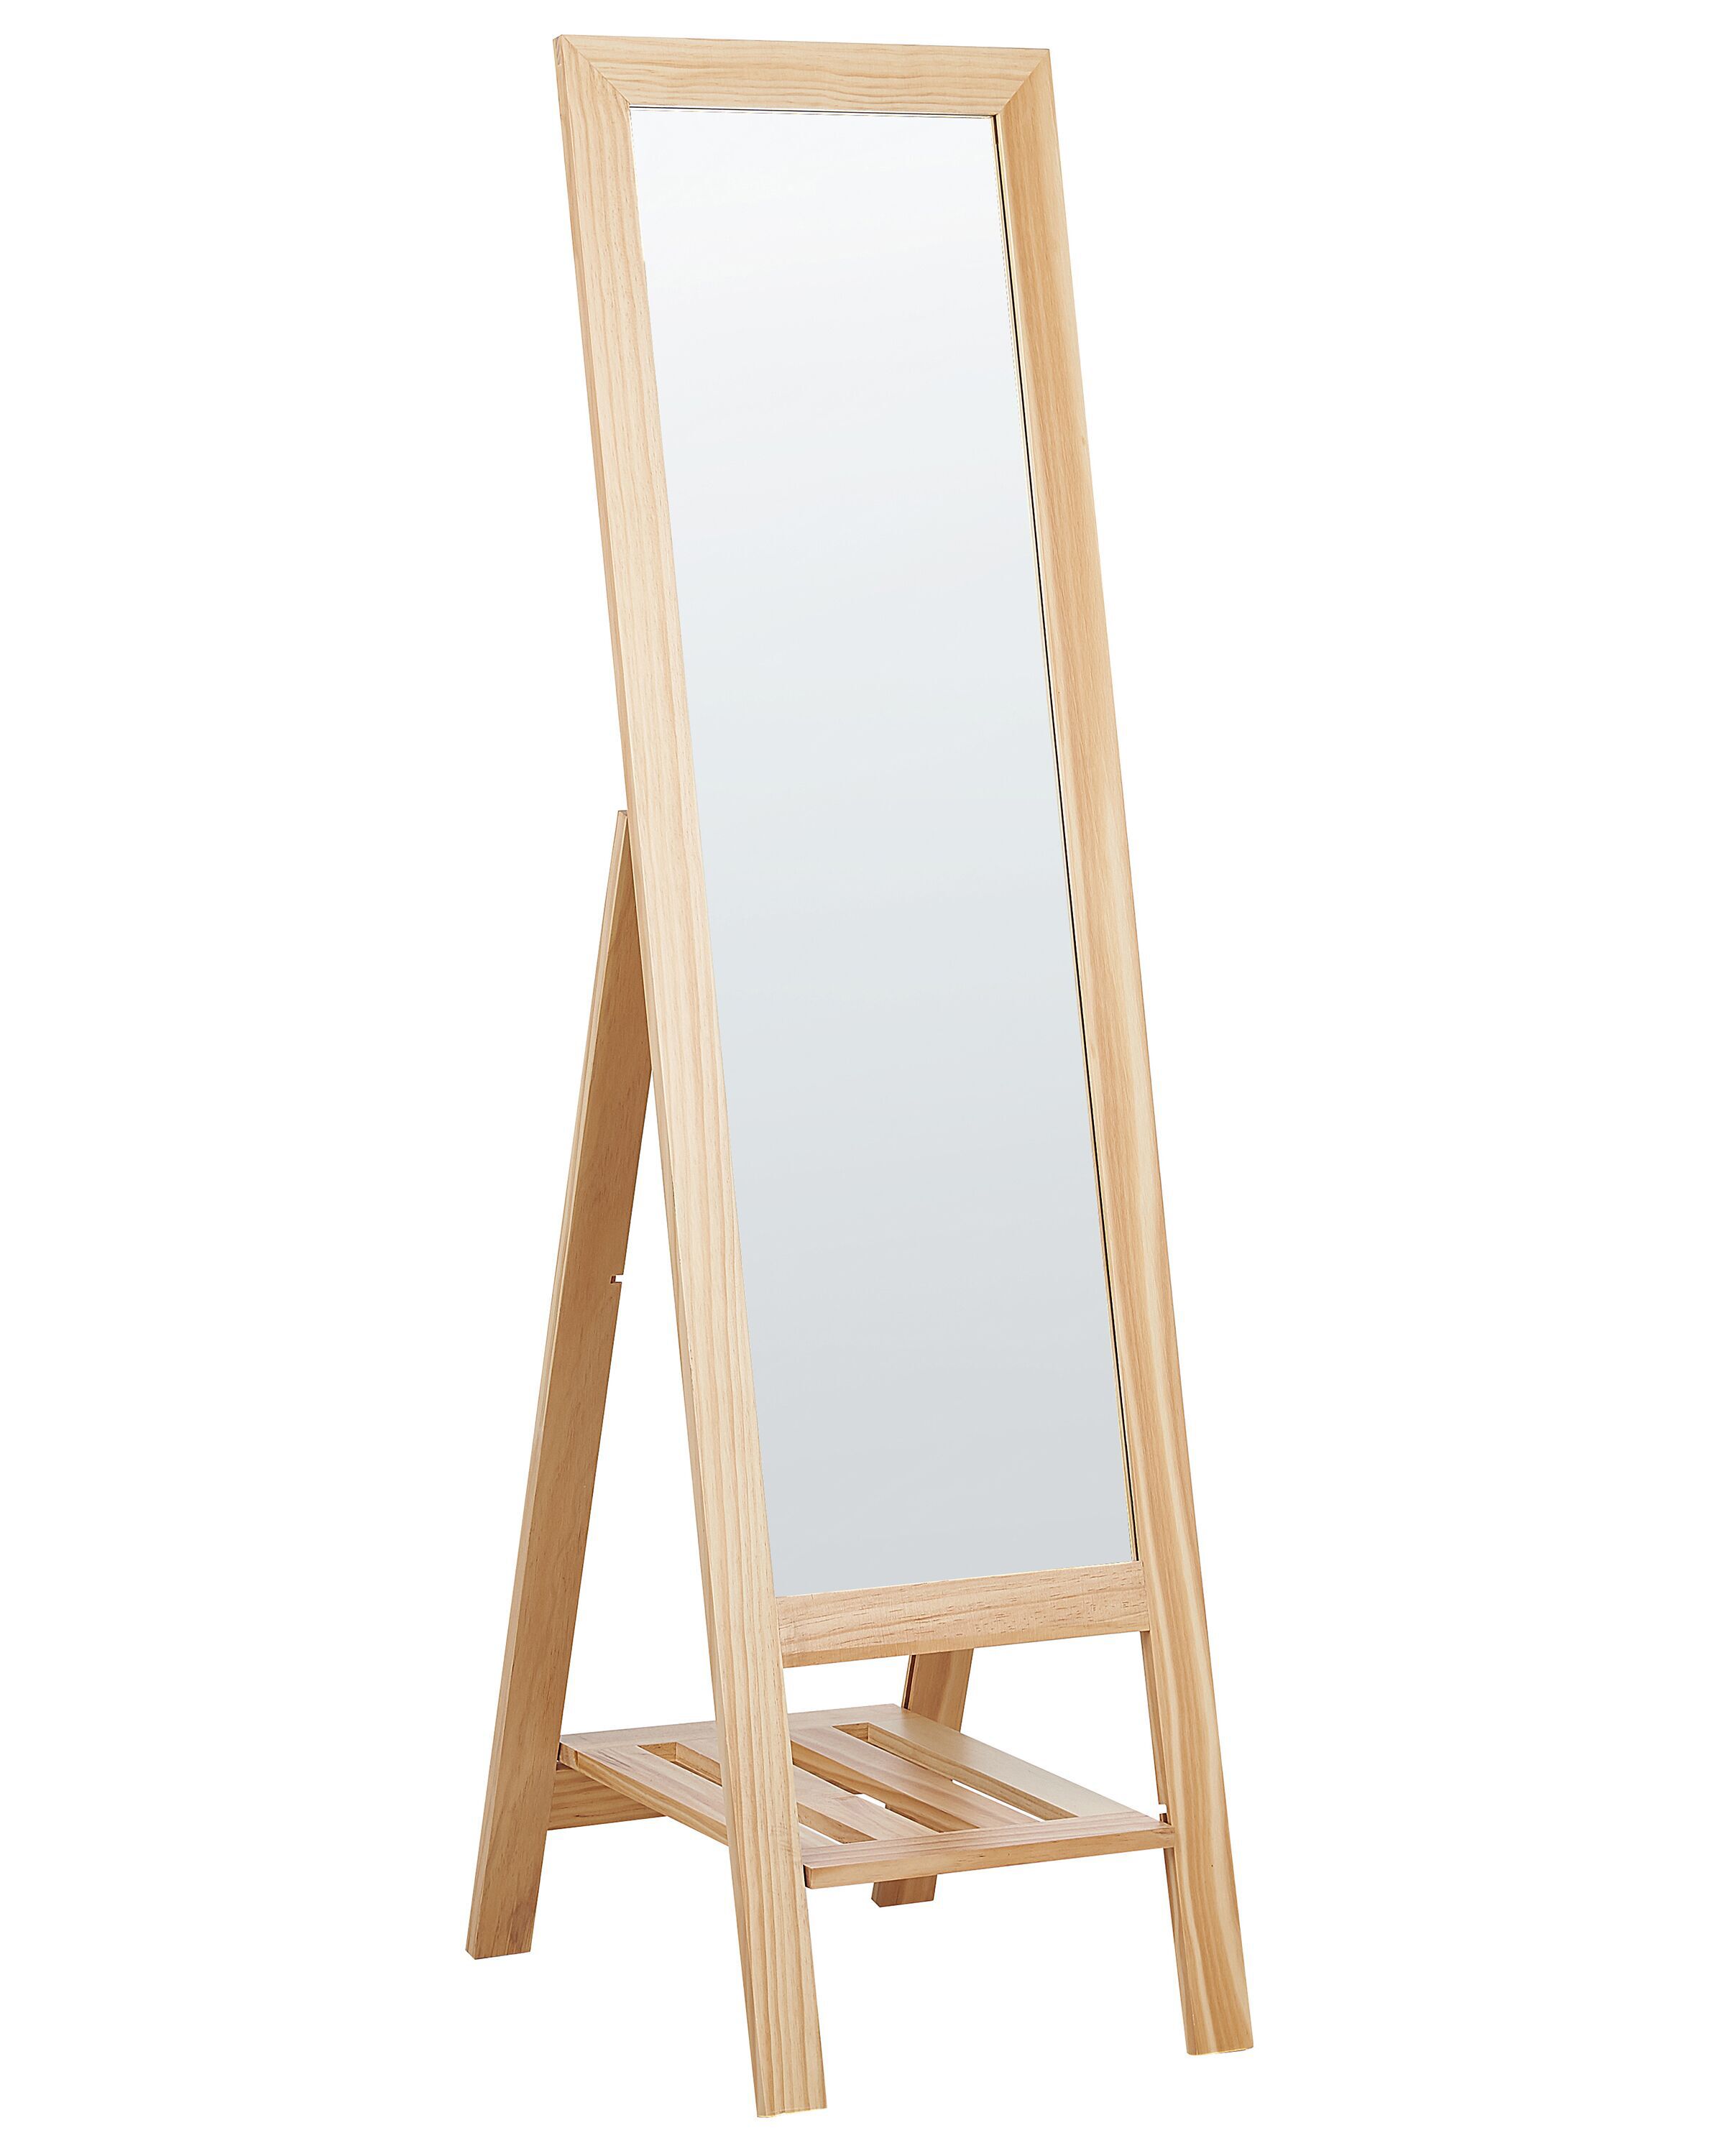 Gallery Solutions Framed Floor Free Standing Easel Full Length Mirror, 16″  x 57″, White – Home Accessories